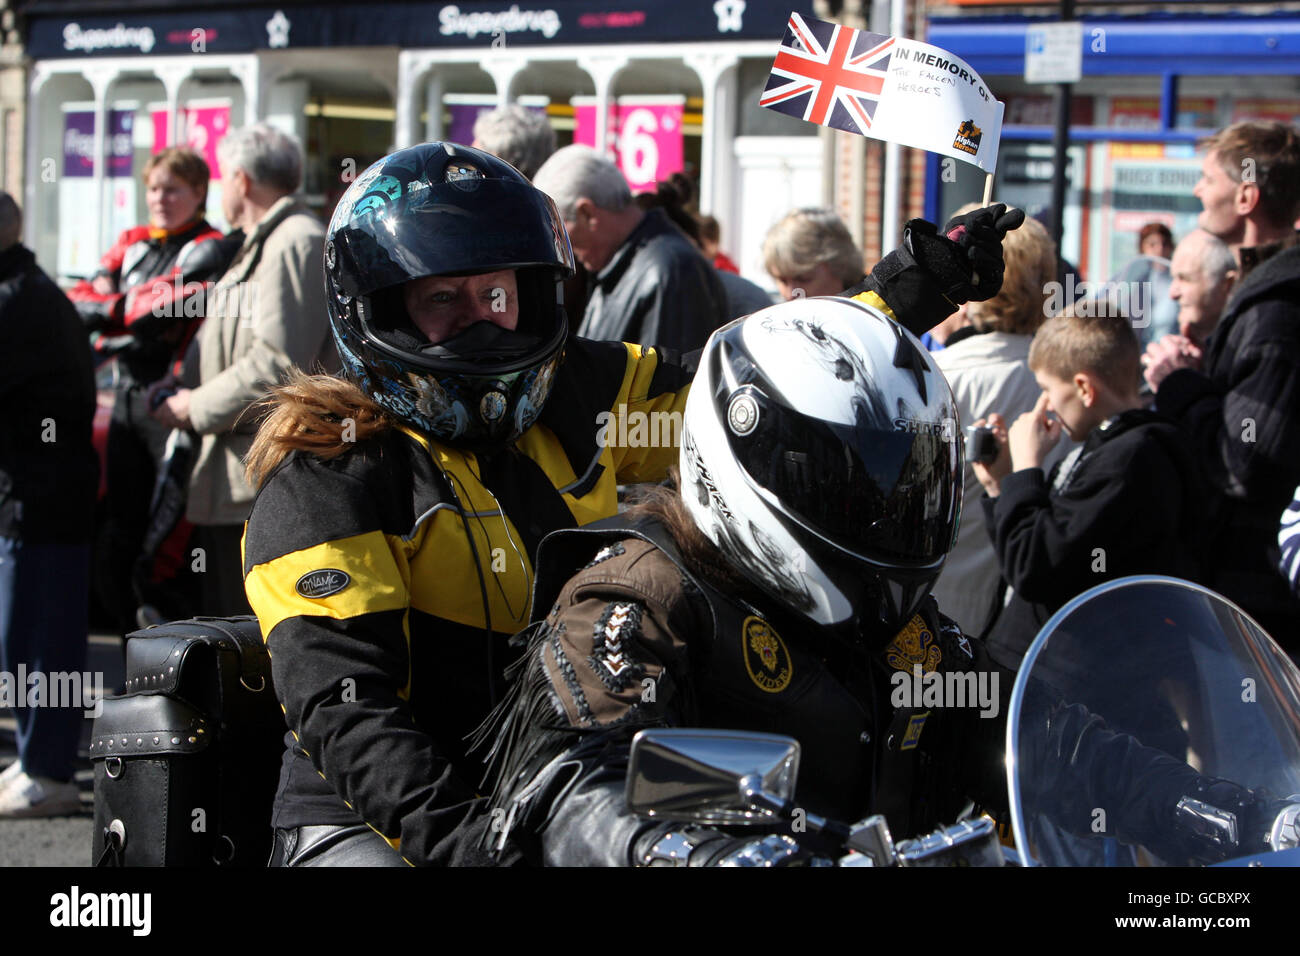 Bikers take part in a mass motorcycle ride in aid of the charity Afghan Heroes, they set off from Hullavington Airfield and passed through Wootton Bassett, in Wiltshire, to honour troops killed in Afghanistan. Stock Photo